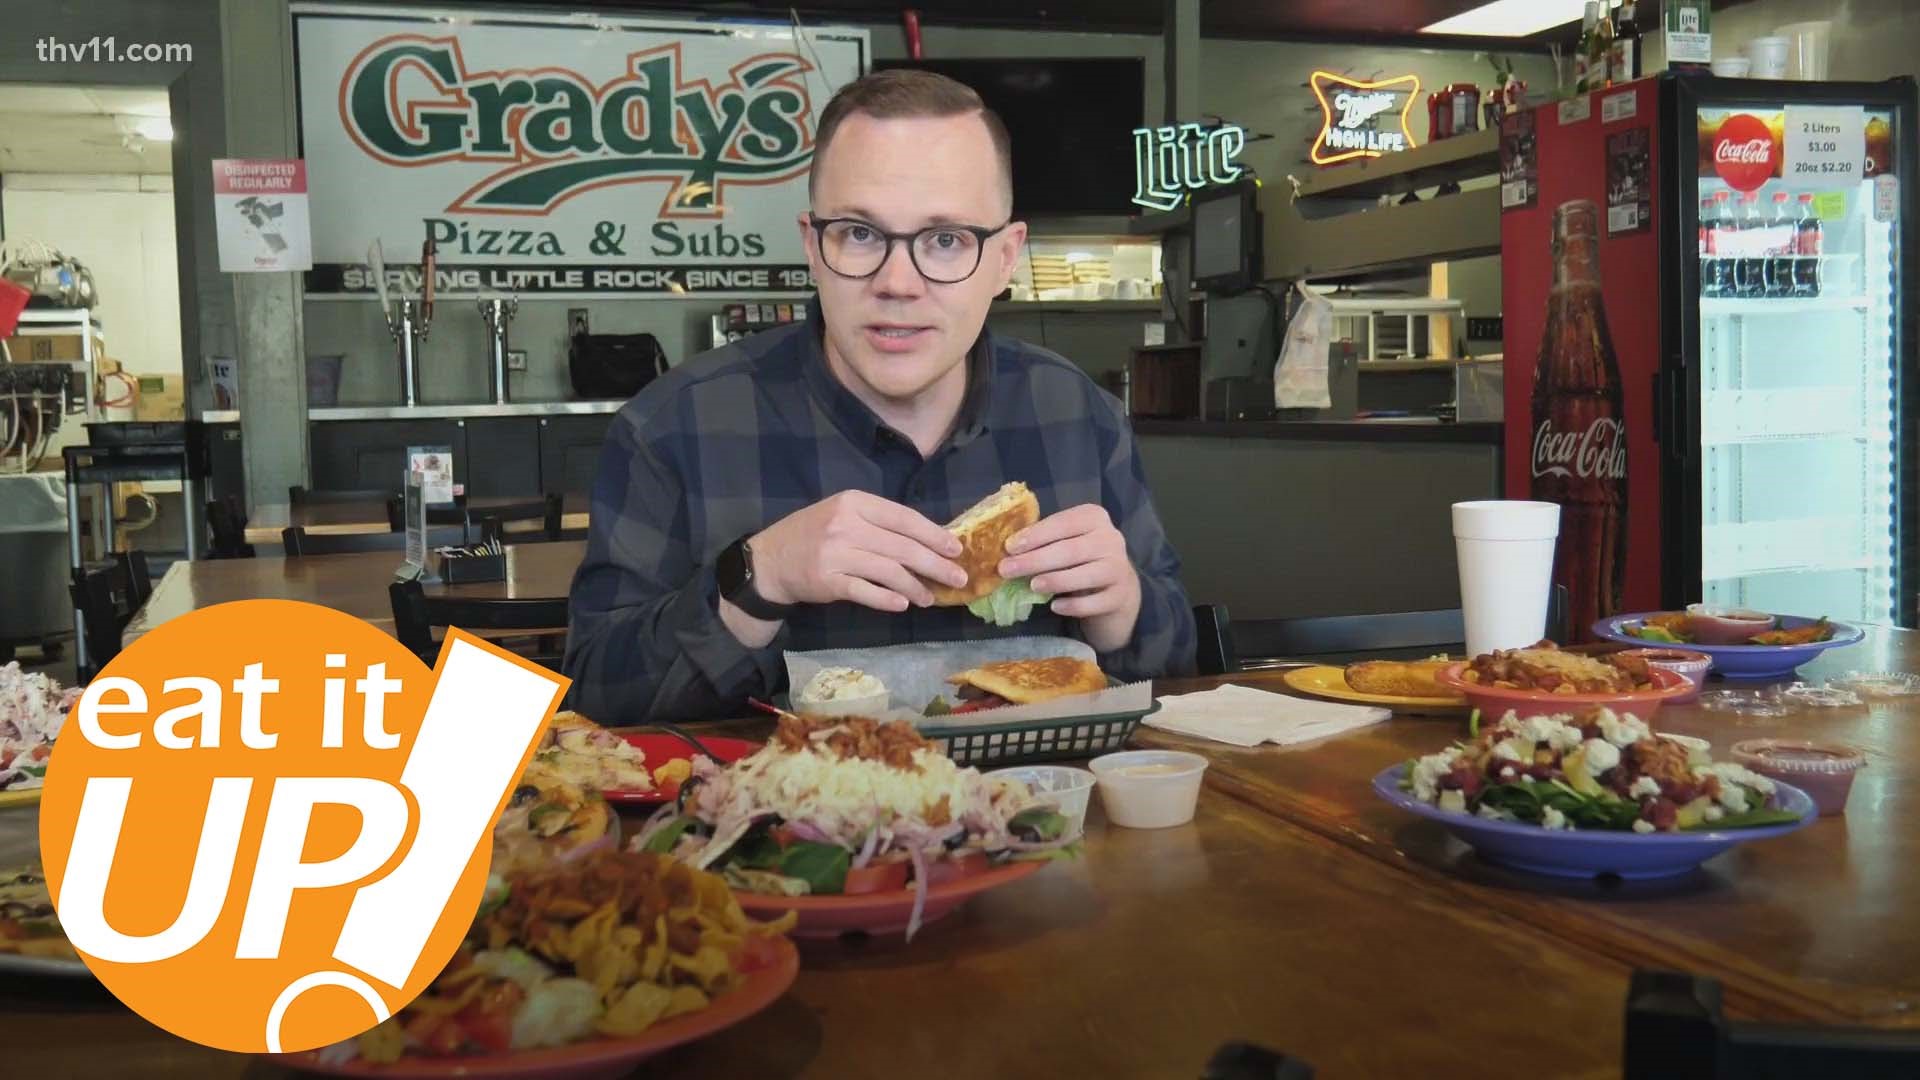 On this week's episode of Eat It Up, Skot Covert visits Grady's Pizza & Subs, a St. Louis-style eatery right here in the heart of Little Rock.